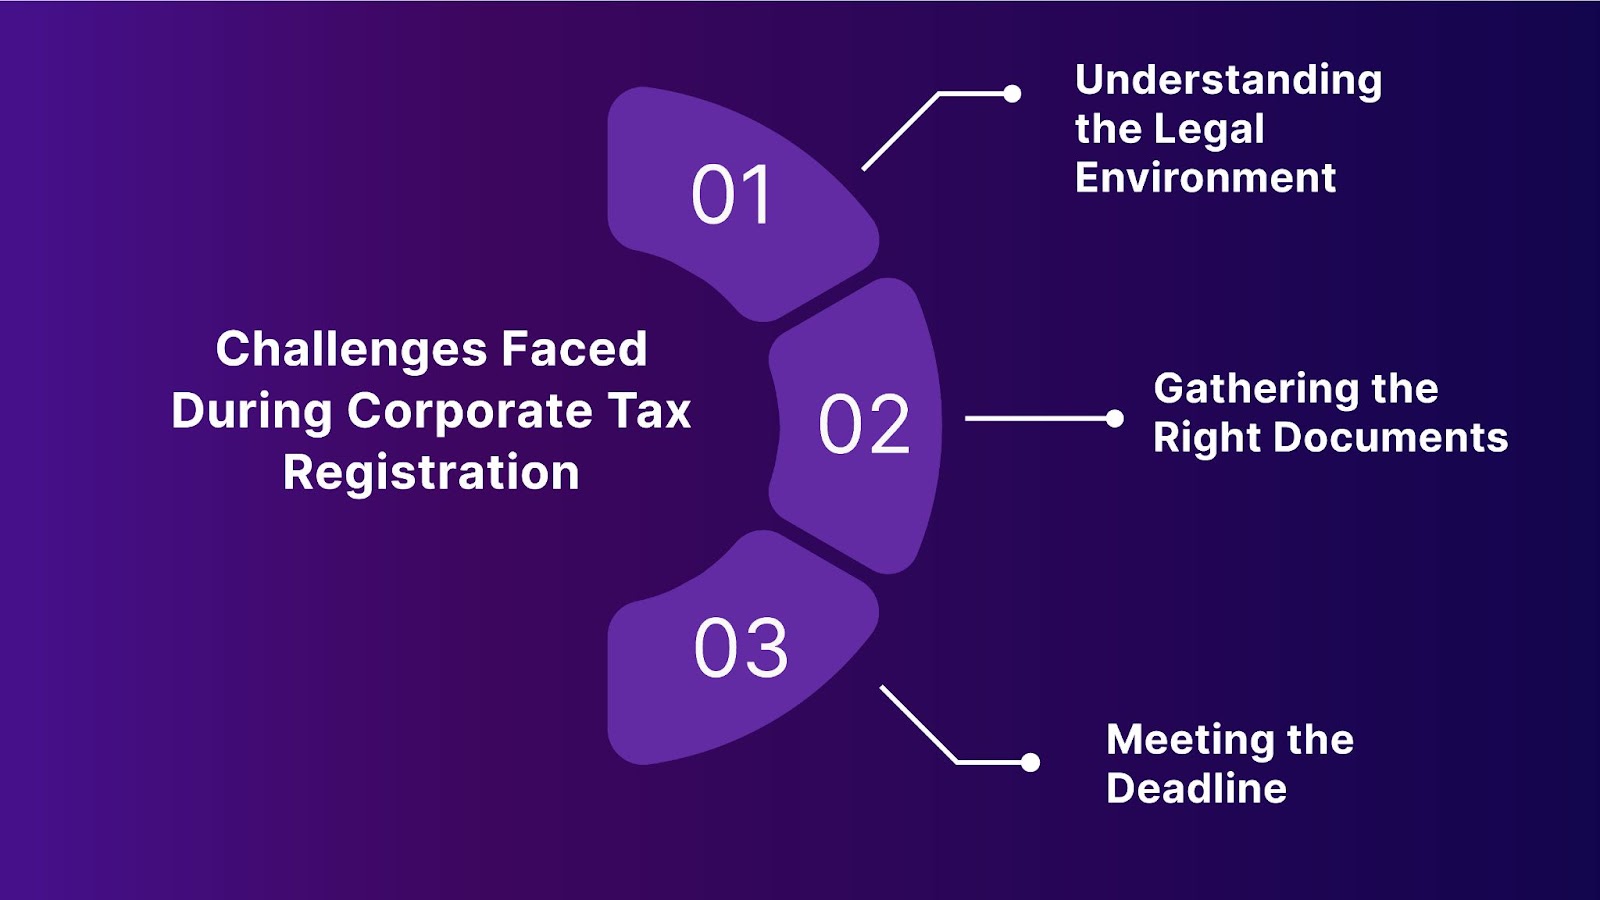 Challenges Faced During Corporate Tax Registration